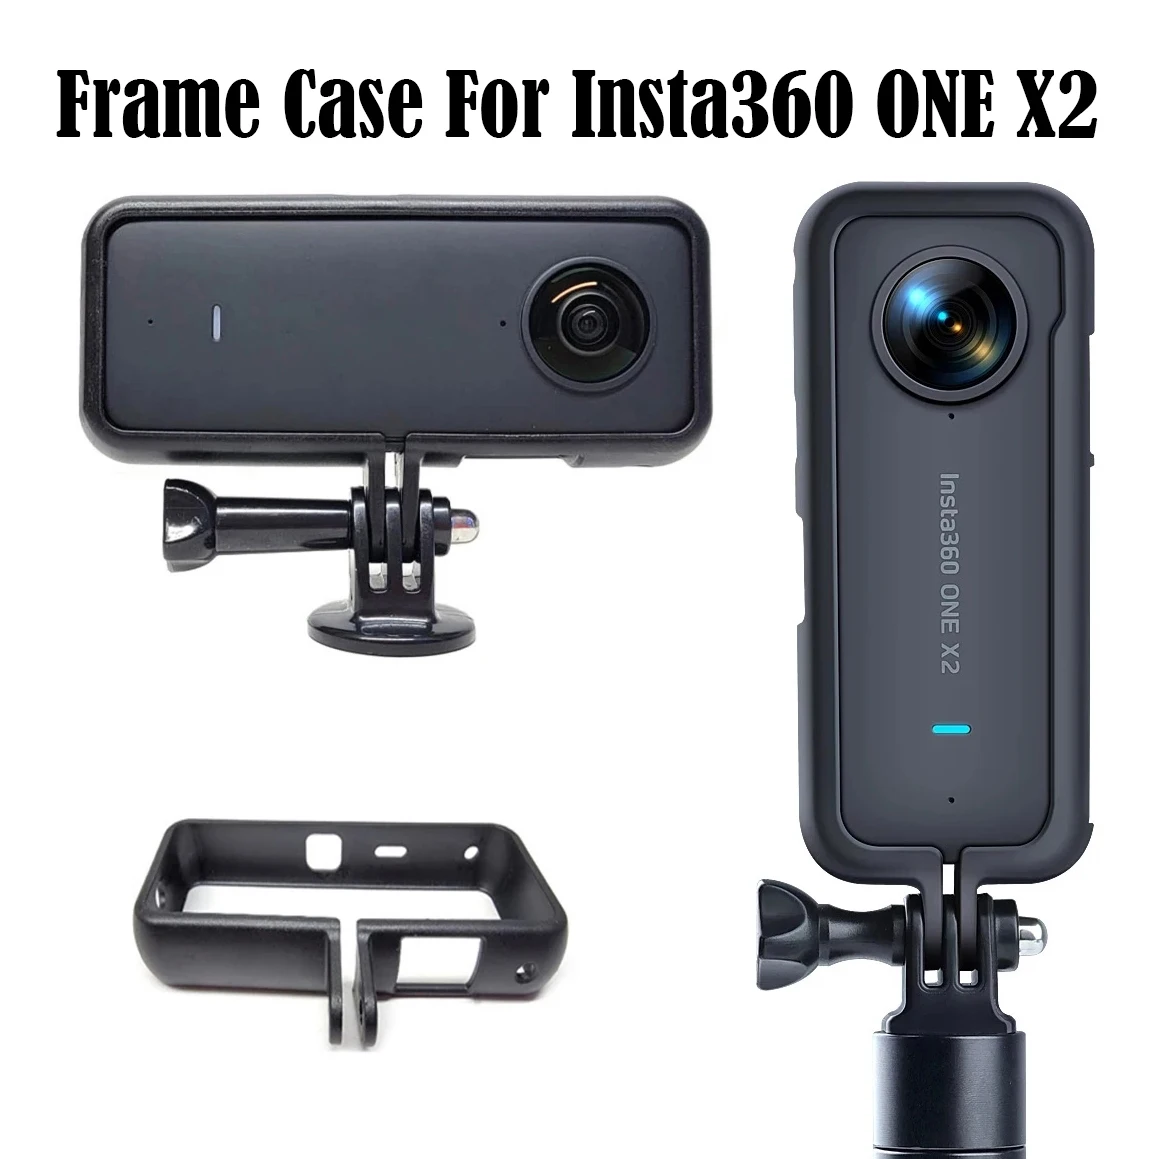 

Protective Frame for Insta360 One X2 Border Case Holder Tripod Adapter Mount Expansion Bracket with Adapter Base and Long Screw